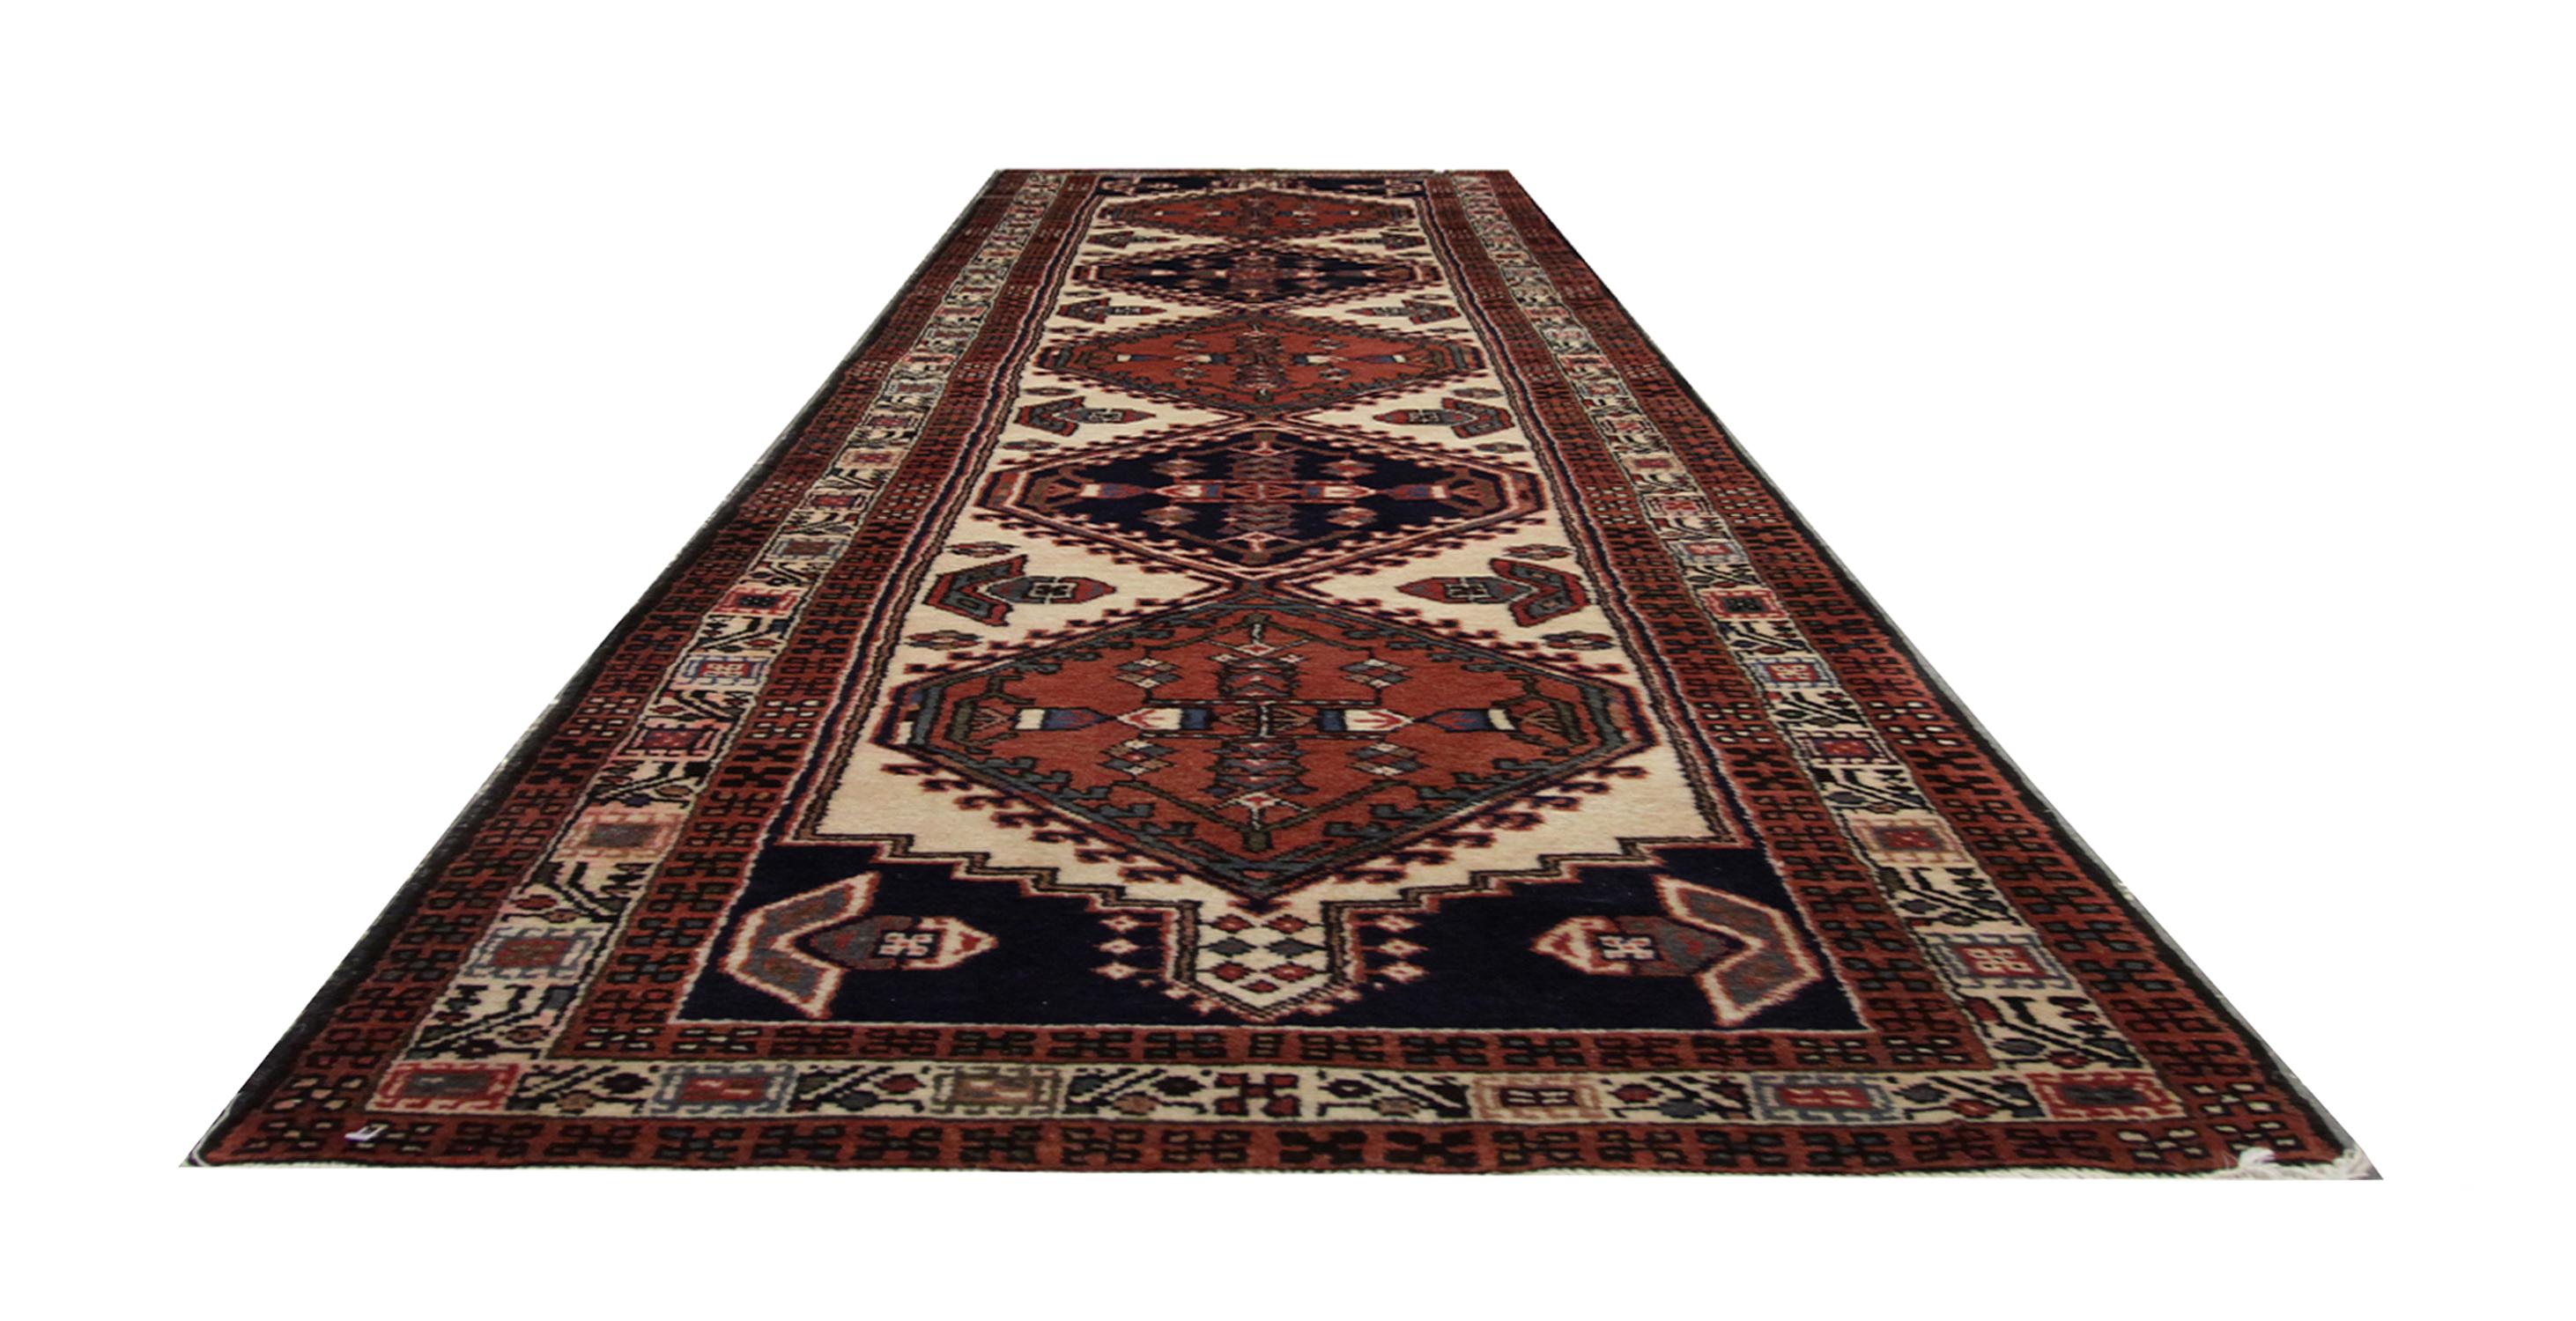 Handmade carpet Oriental rug muted tones sit in harmony in this brown / orange and cream Vintage runner rug. Constructed by hand by artisans in Pakistan this hallway runner features a detailed layered border and a central, blue and brown, repeat